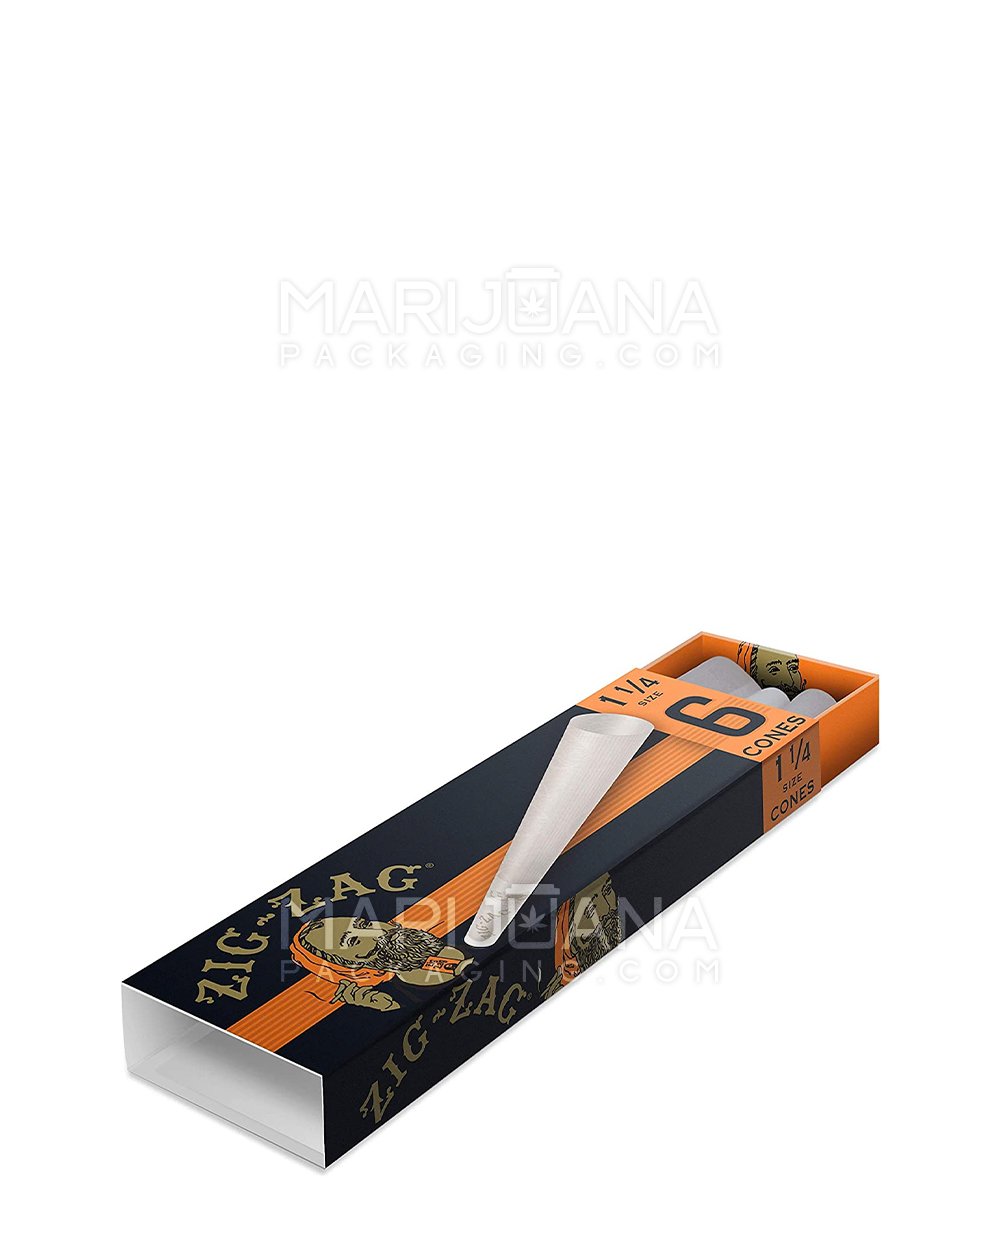 ZIG ZAG | 'Retail Display' 1 1/4 Pre-Rolled Cones Promo Pack | 84mm - White Paper - 36 Count - 2